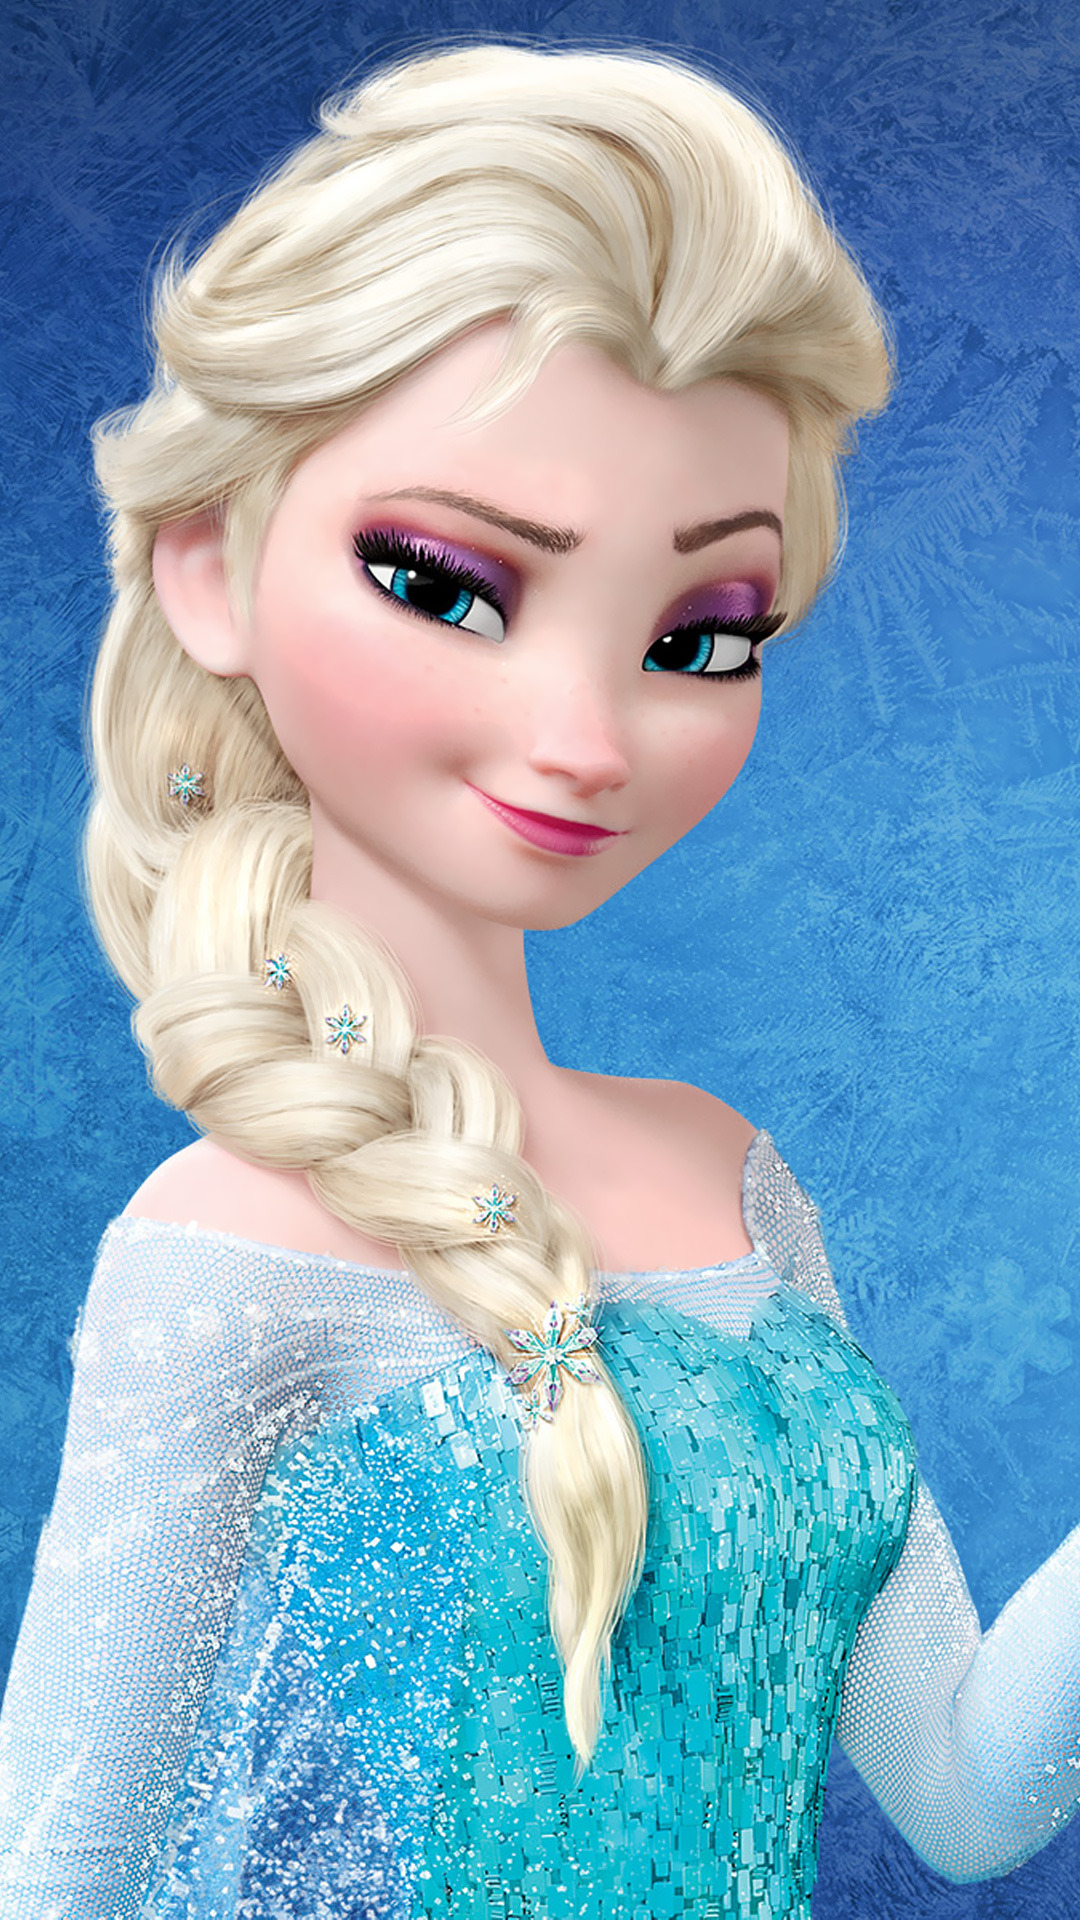 Frozen Elsa   Best htc one wallpapers and easy to download 1080x1920